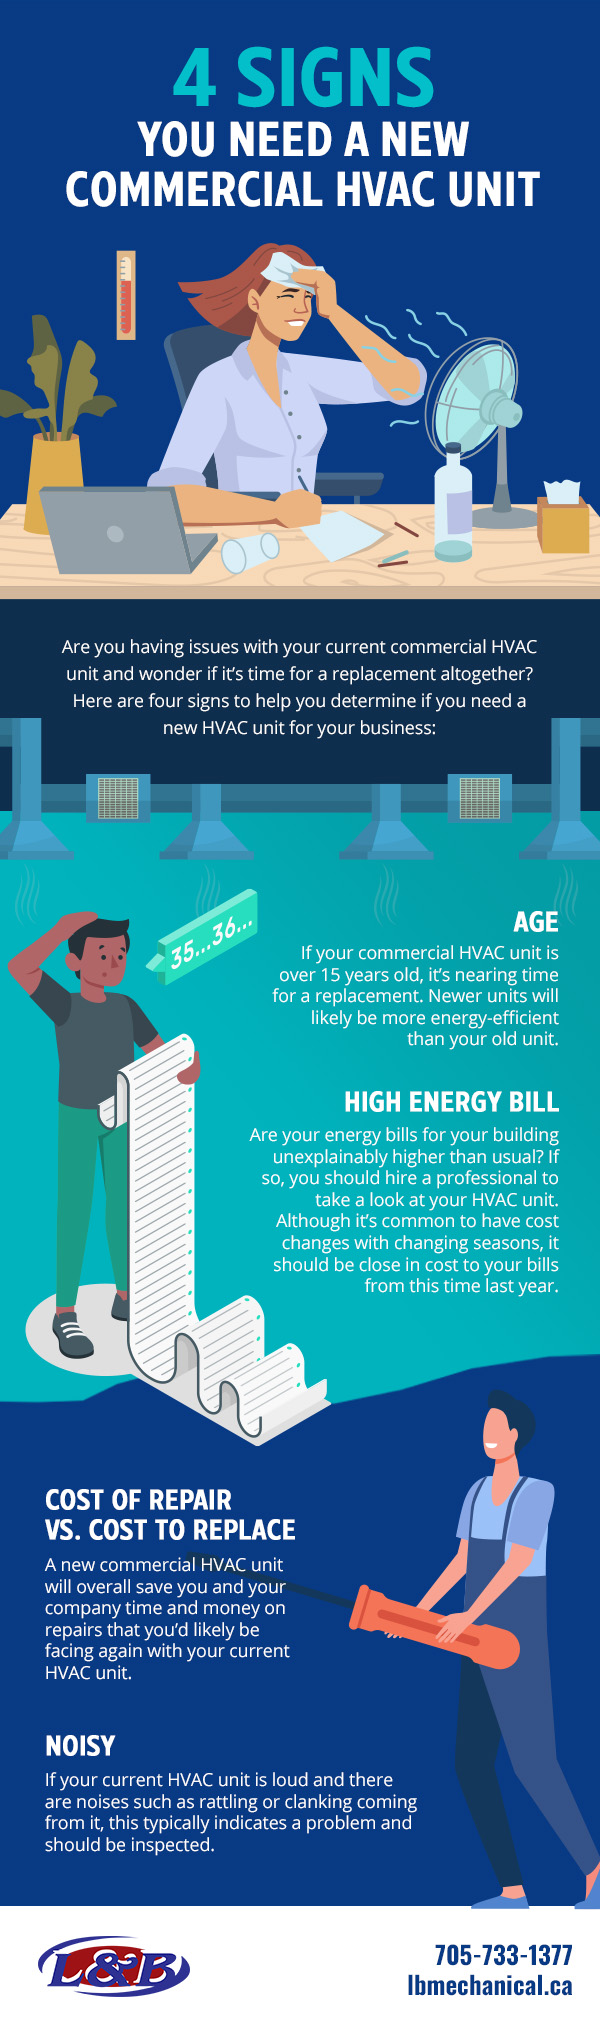 4 Signs You Need a New Commercial HVAC Unit [infographic]